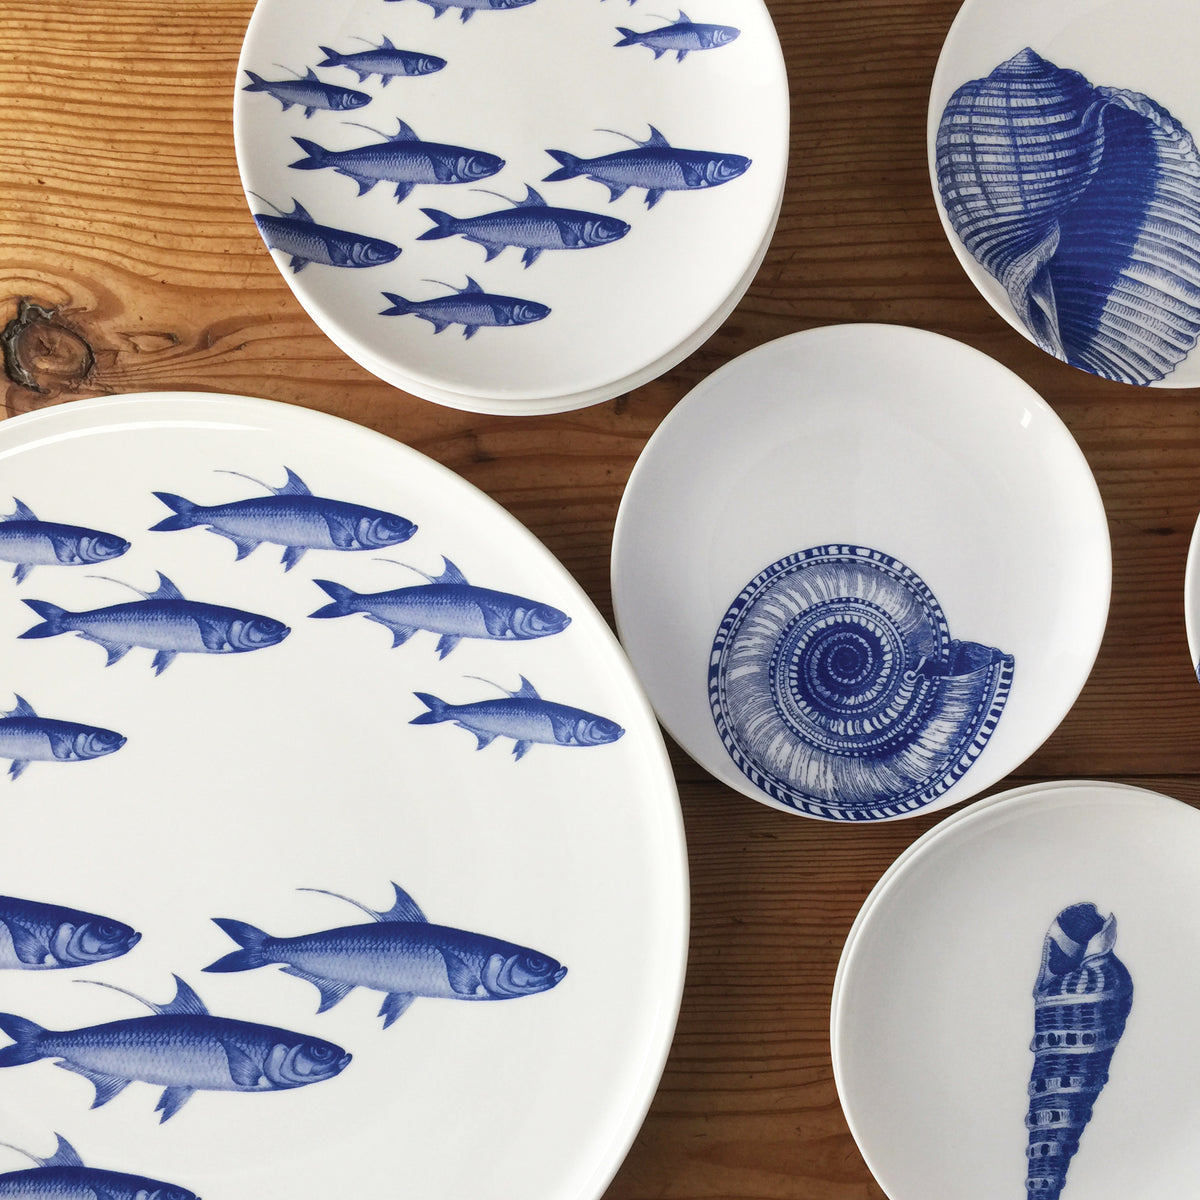 Small School of Fish Canapé Plates adorned with fish and shells, perfect for a coastal theme by Caskata Artisanal Home.